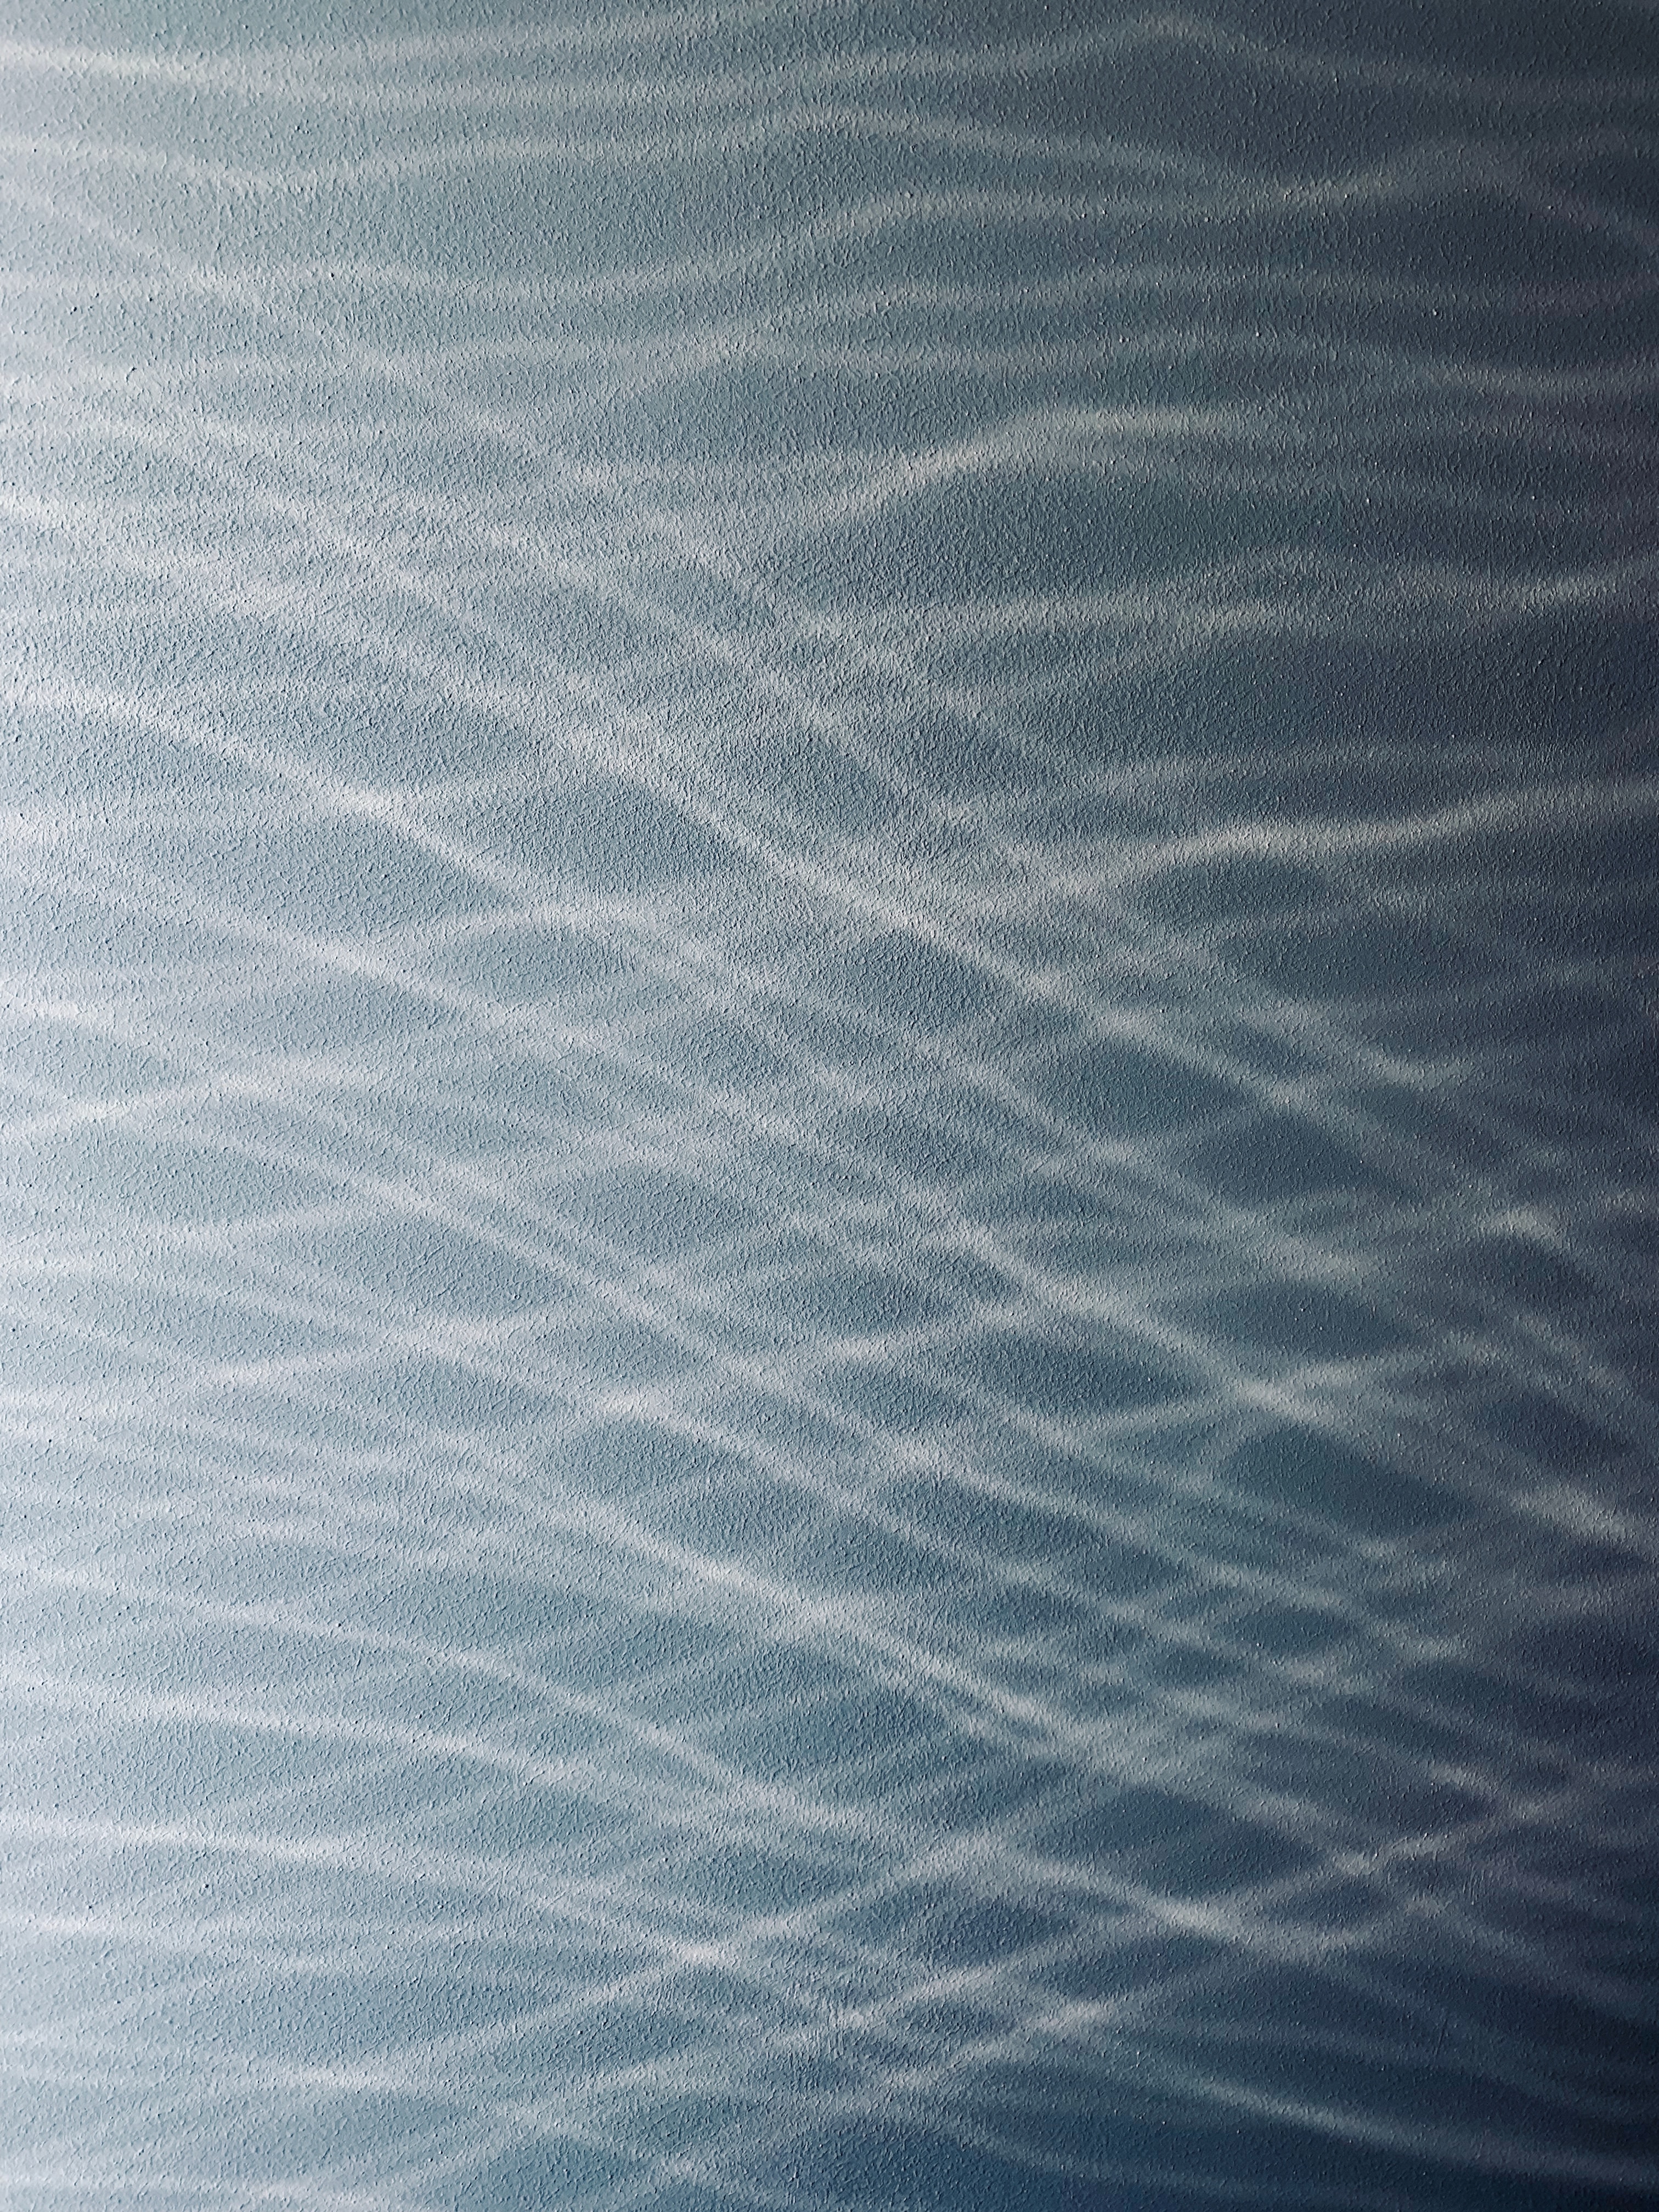 textures, wavy, texture, lines, wall phone background